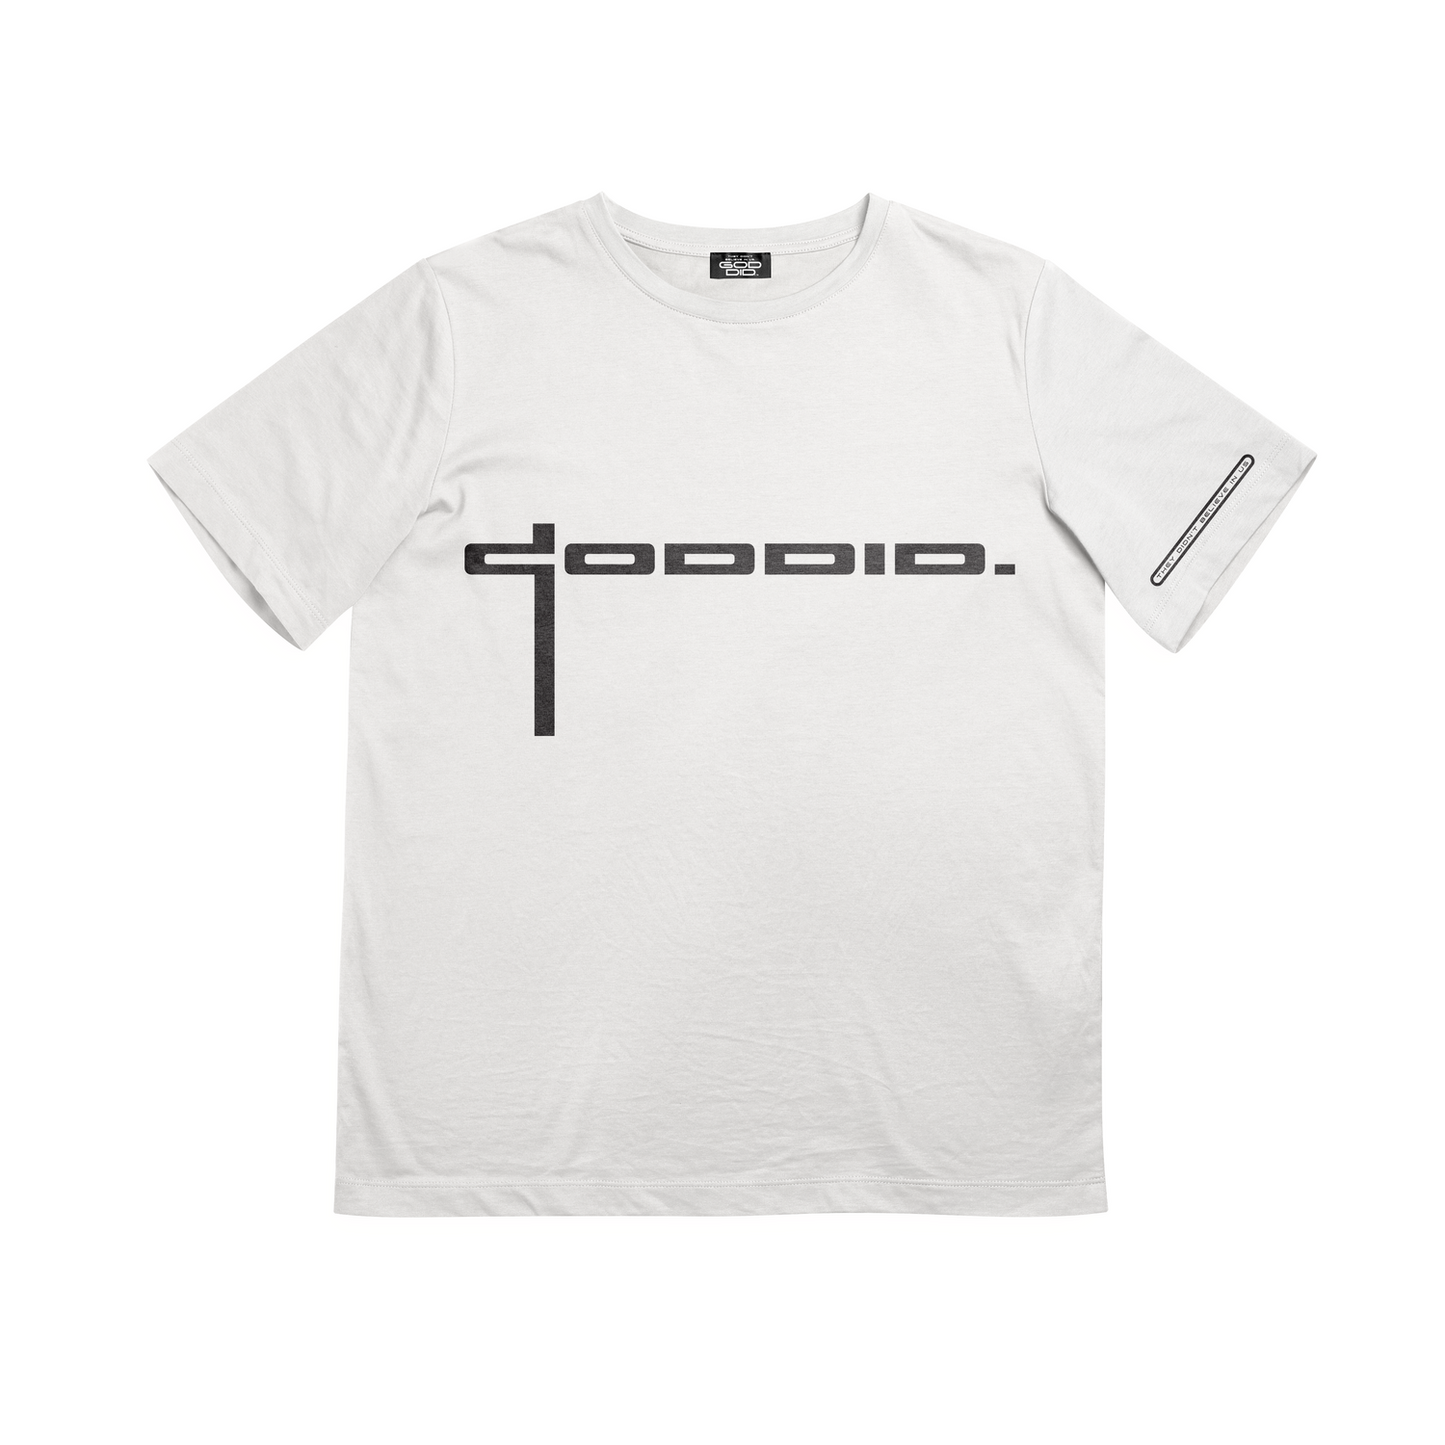 LIMITED GOD DID. WHITE TEE